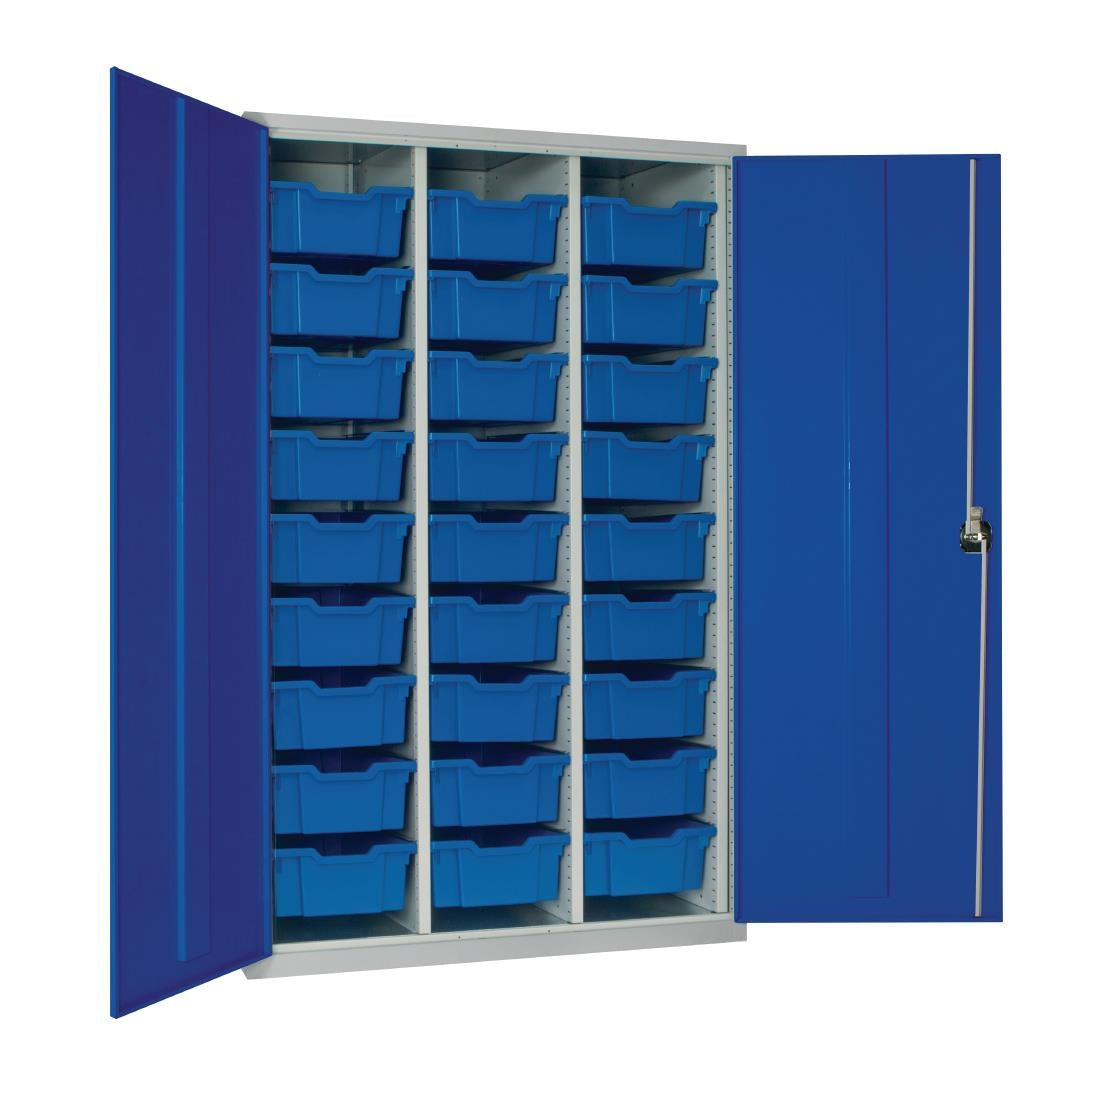 27 Tray High-Capacity Storage Cupboard - Blue with Blue Trays